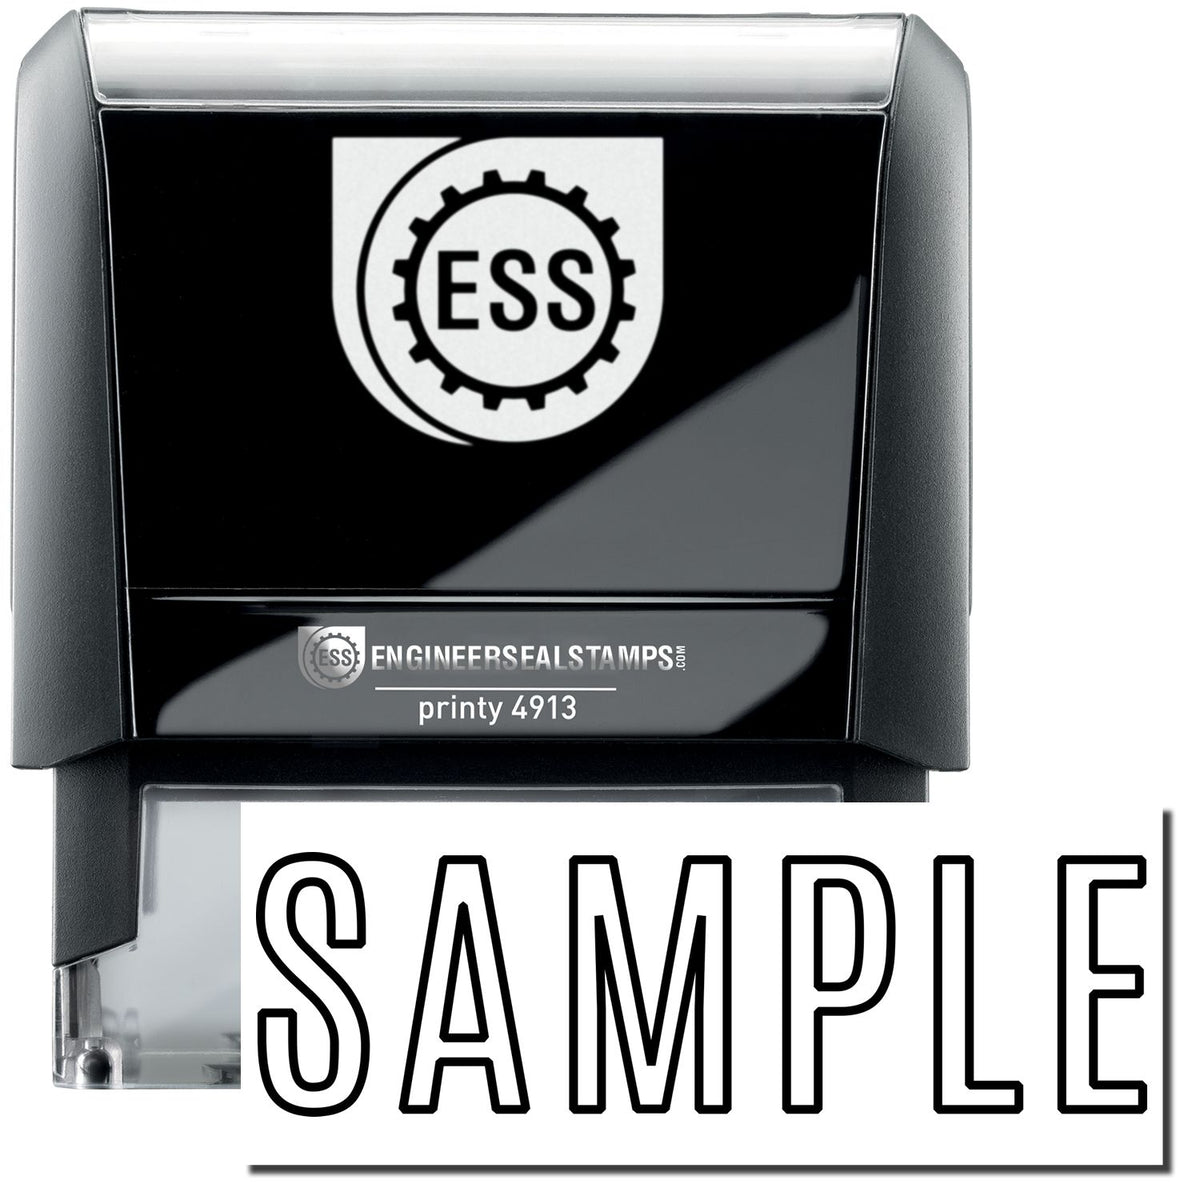 A self-inking stamp with a stamped image showing how the text &quot;SAMPLE&quot; in a large outline style is displayed by it after stamping.